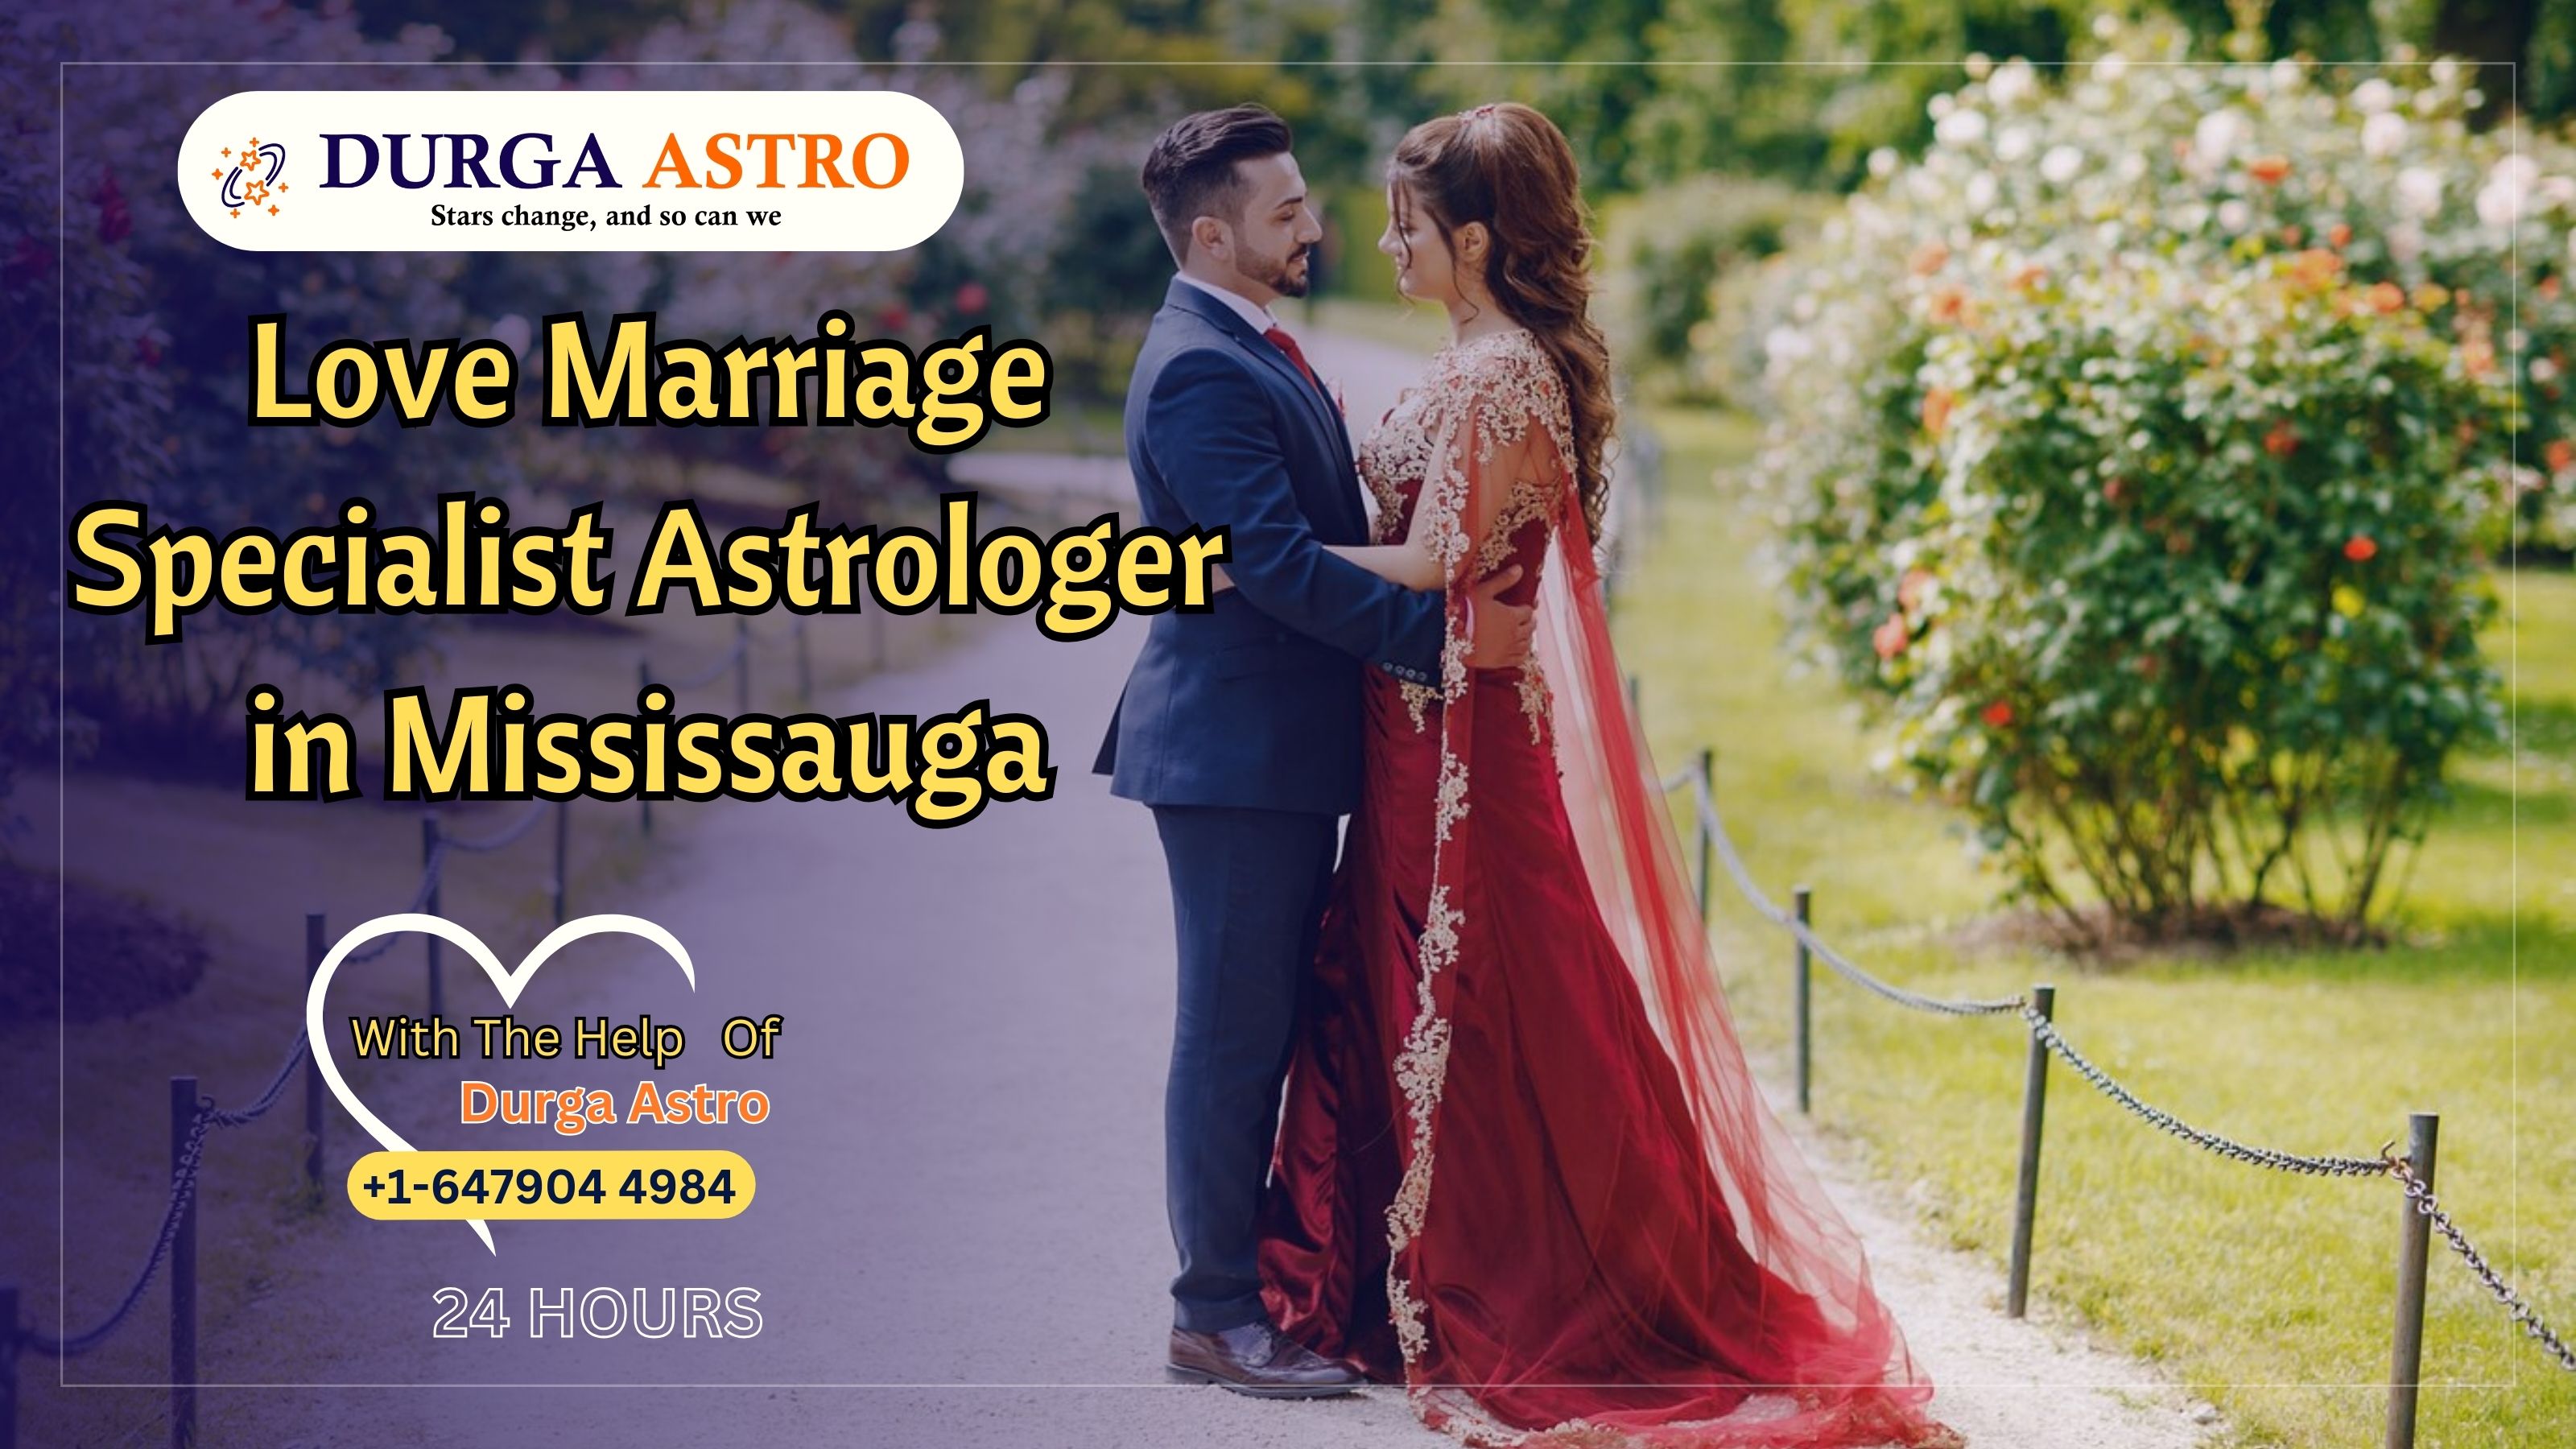 Love Marriage Specialist Astrologer in Mississauga